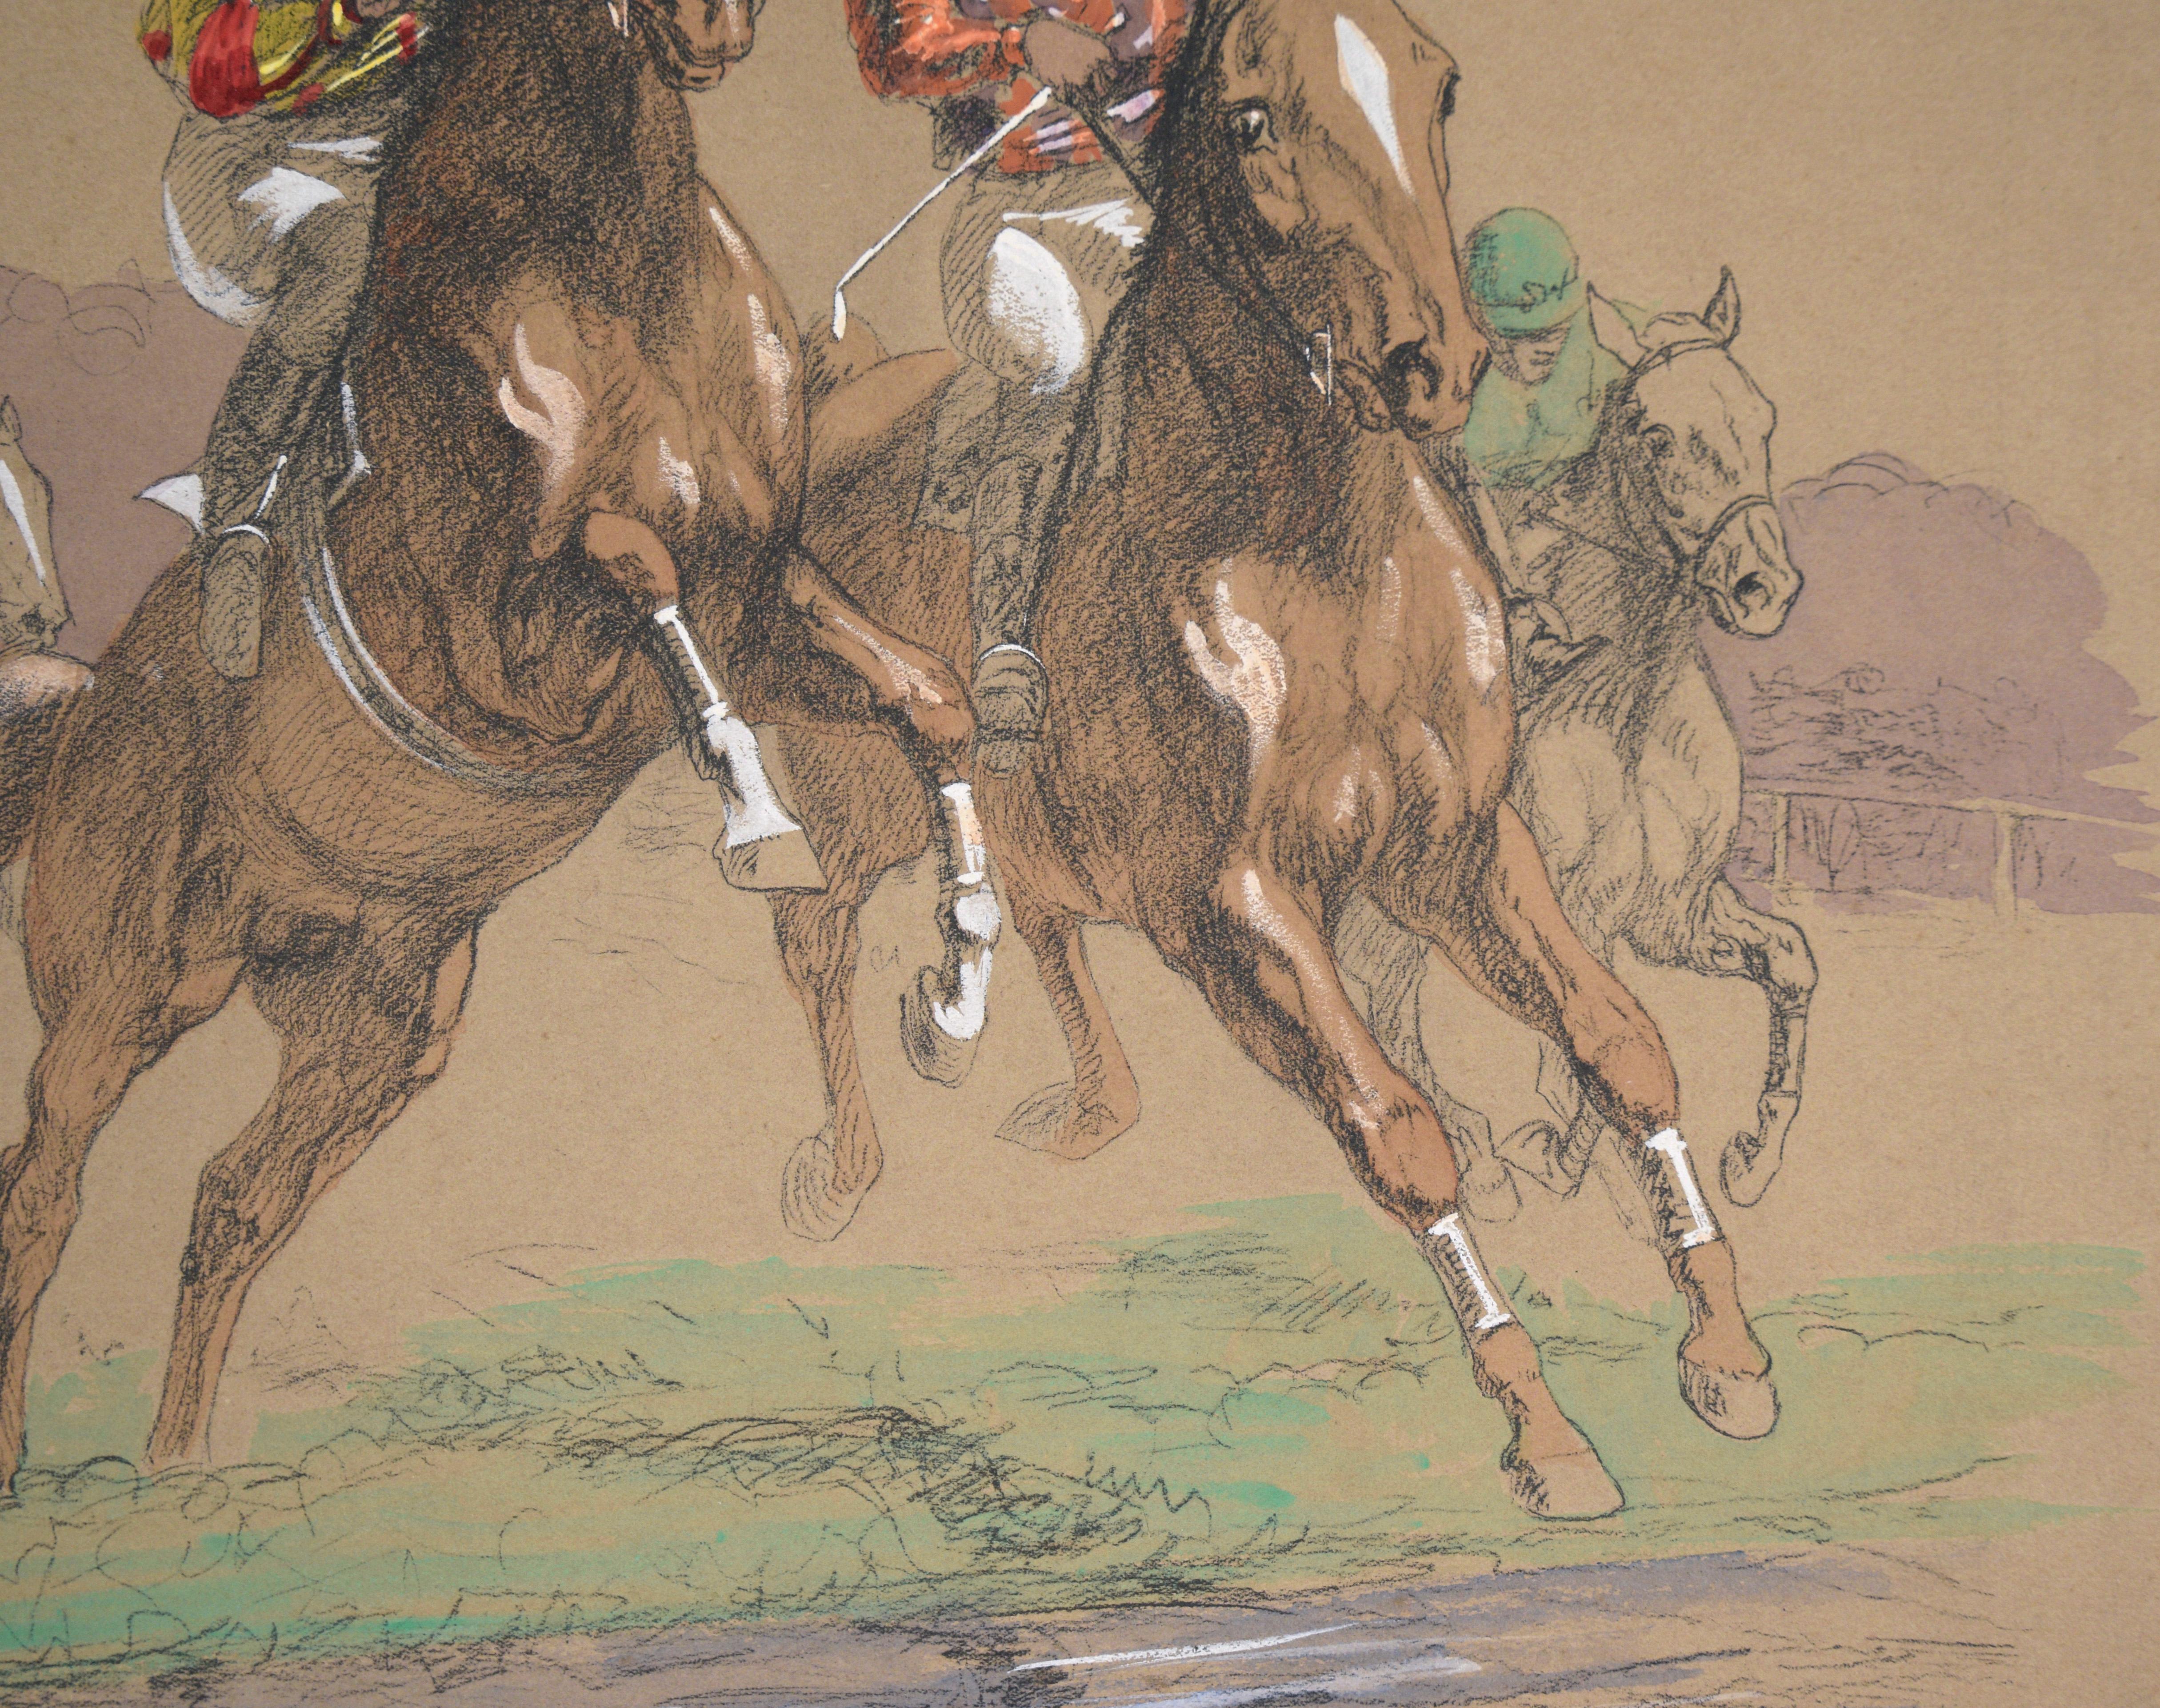 Horse Race - Hand Colored Lithograph in Gouache

Dynamic hand-colored lithograph by Eugene Pechaubes (French, 1890-1967). Five horses and their riders are racing directly towards the viewer, one of which is jumping over a water hazard. The jockeys